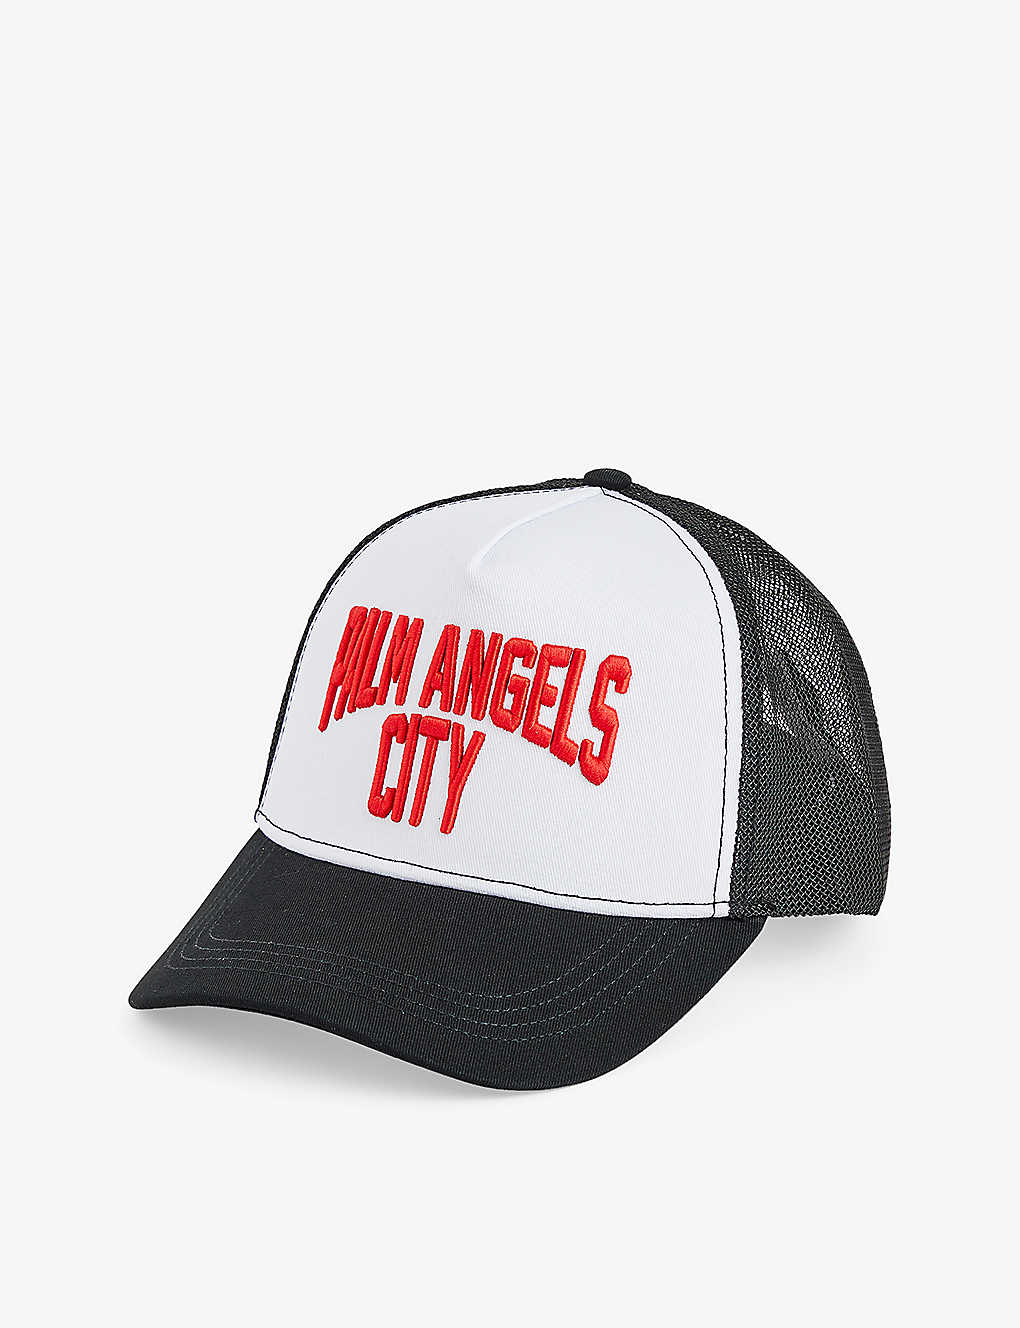 Palm Angels Mens Black Red Brand-embroidered Cotton-blend Cap